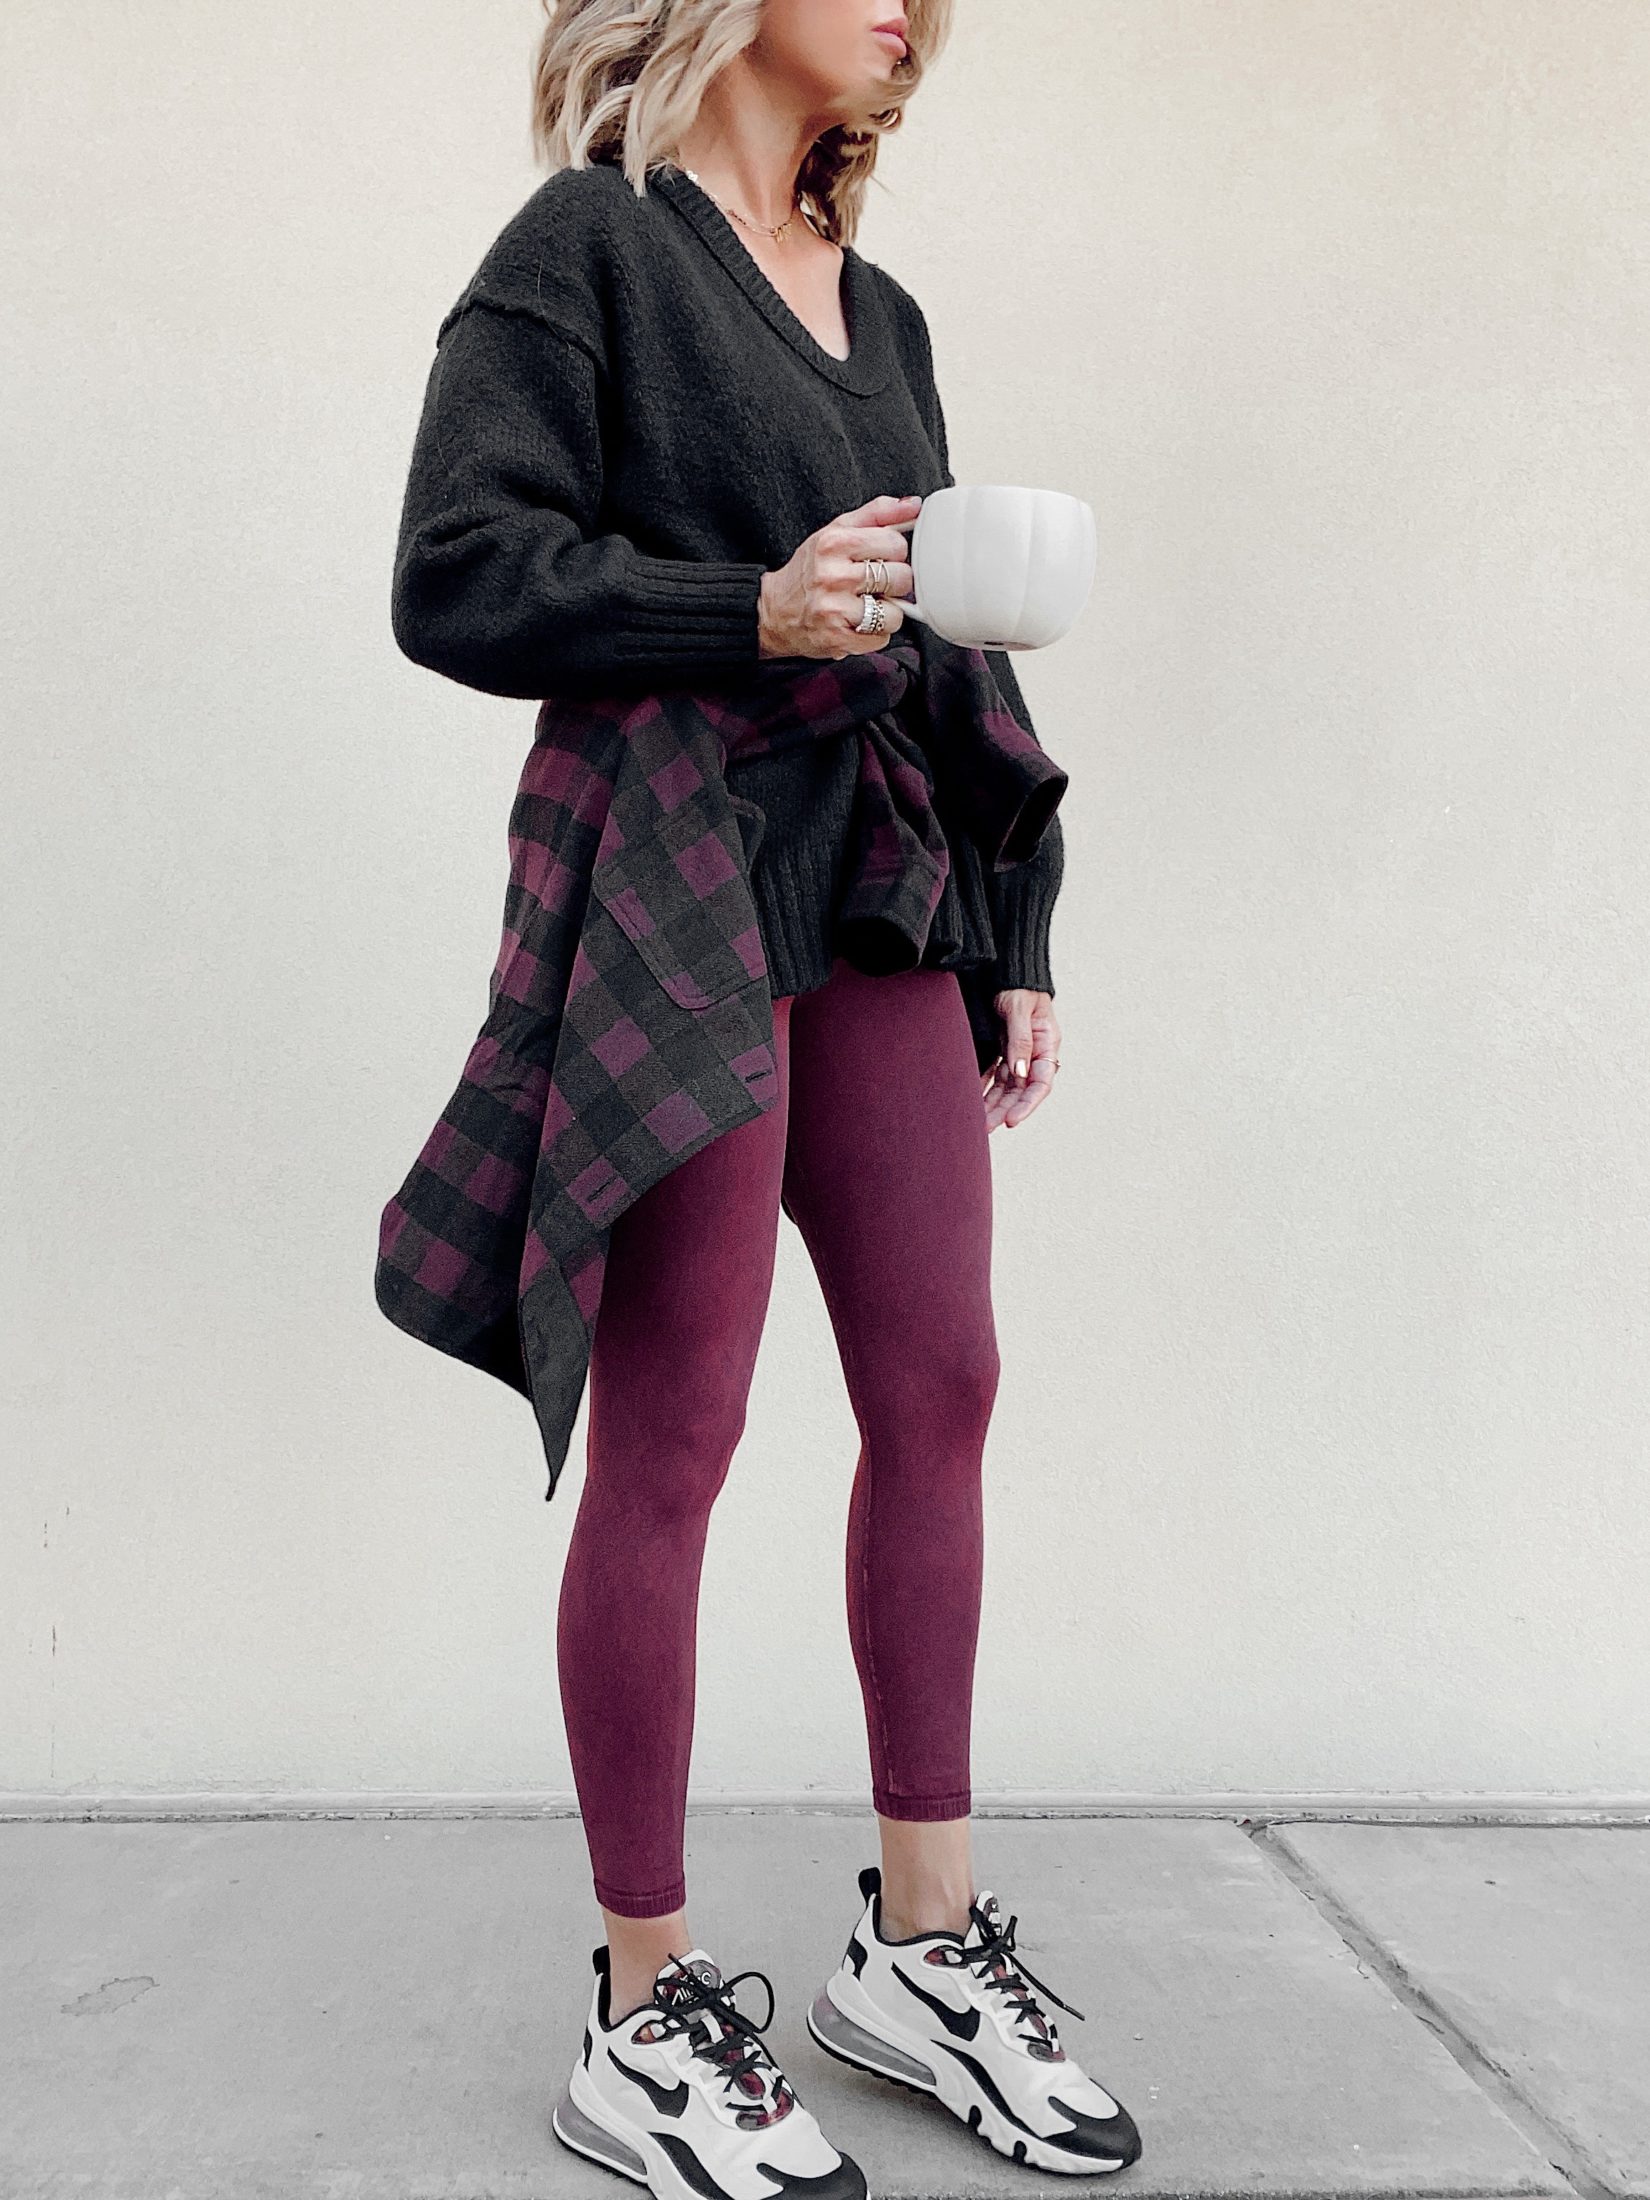 jaime shrayber wearing outfit with plaid shirt tied around waist